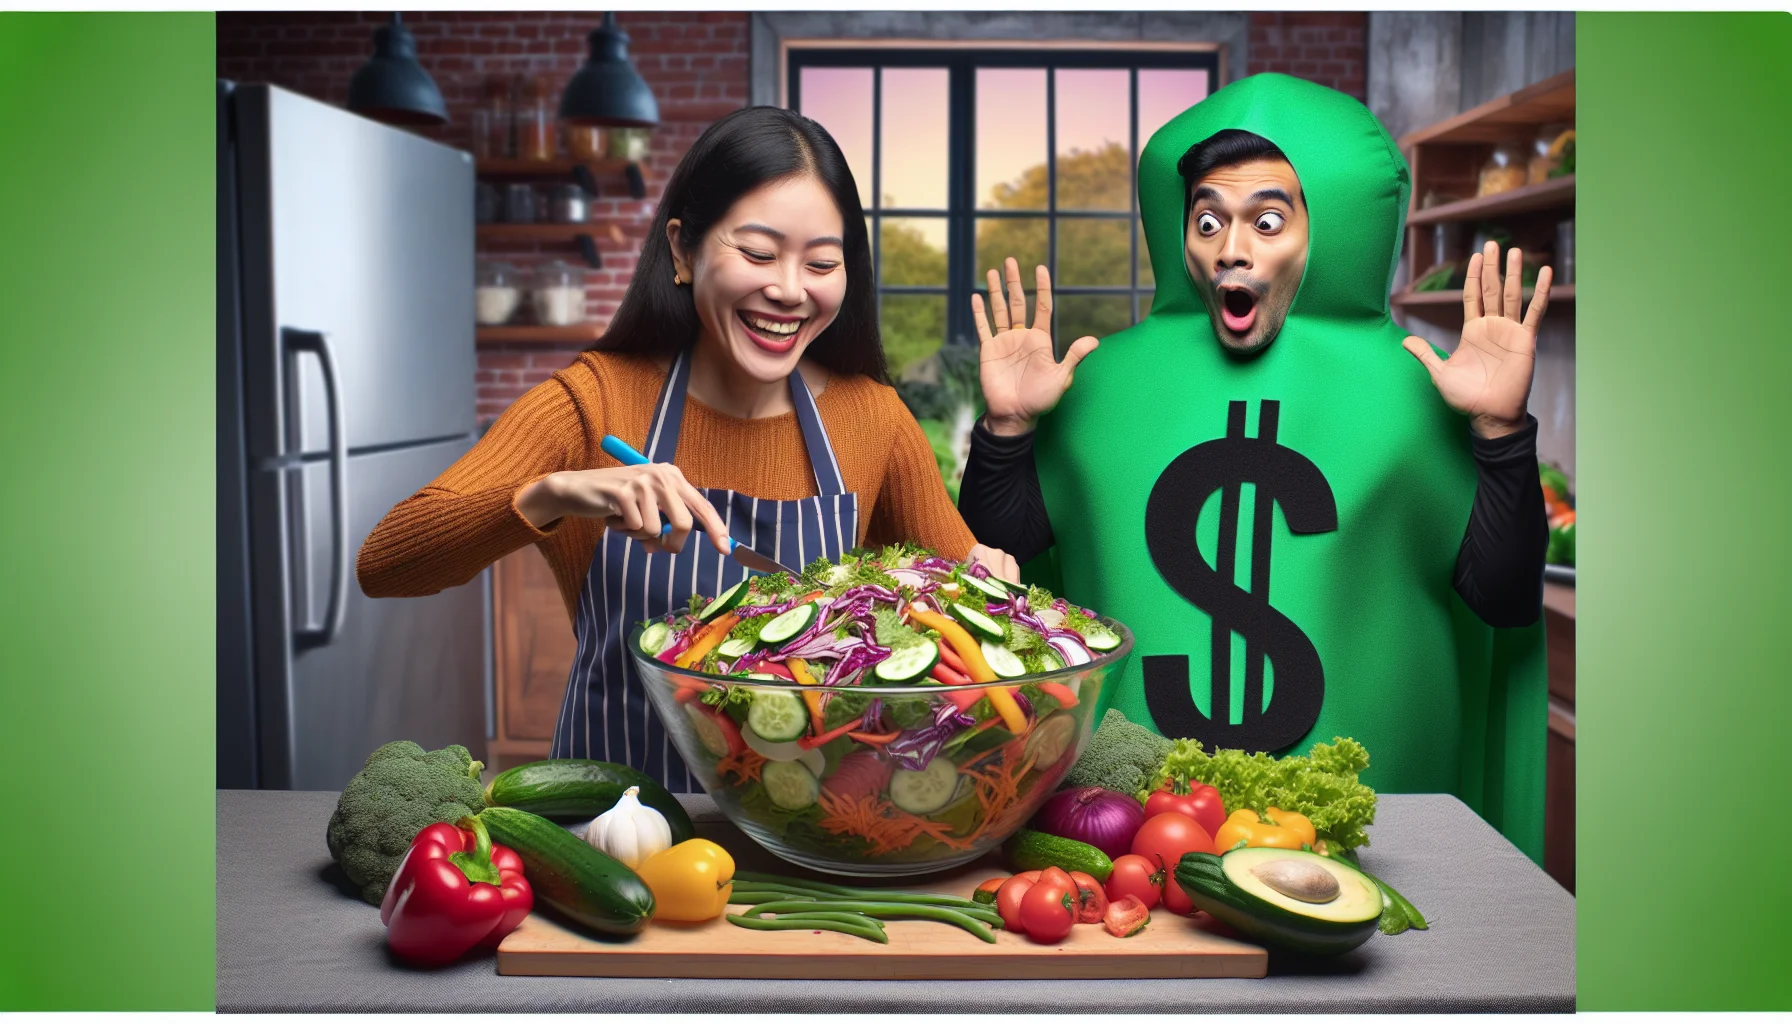 Craft a humorous yet realistic image capturing a Wellness Wednesday Inspiration scenario, revolving around the concept of eating healthy on a budget. Display a South Asian woman with a big grin on her face preparing a huge, delectable salad with colorful vegetables. To add a comedic element, illustrate a Hispanic man wearing a green dollar sign costume standing next to her, shocked at the massive amount of fresh ingredients used for such a small cost. The atmosphere should be light-hearted, inviting, and inspiring, prompting viewers to consider budget-friendly, healthy dietary choices.